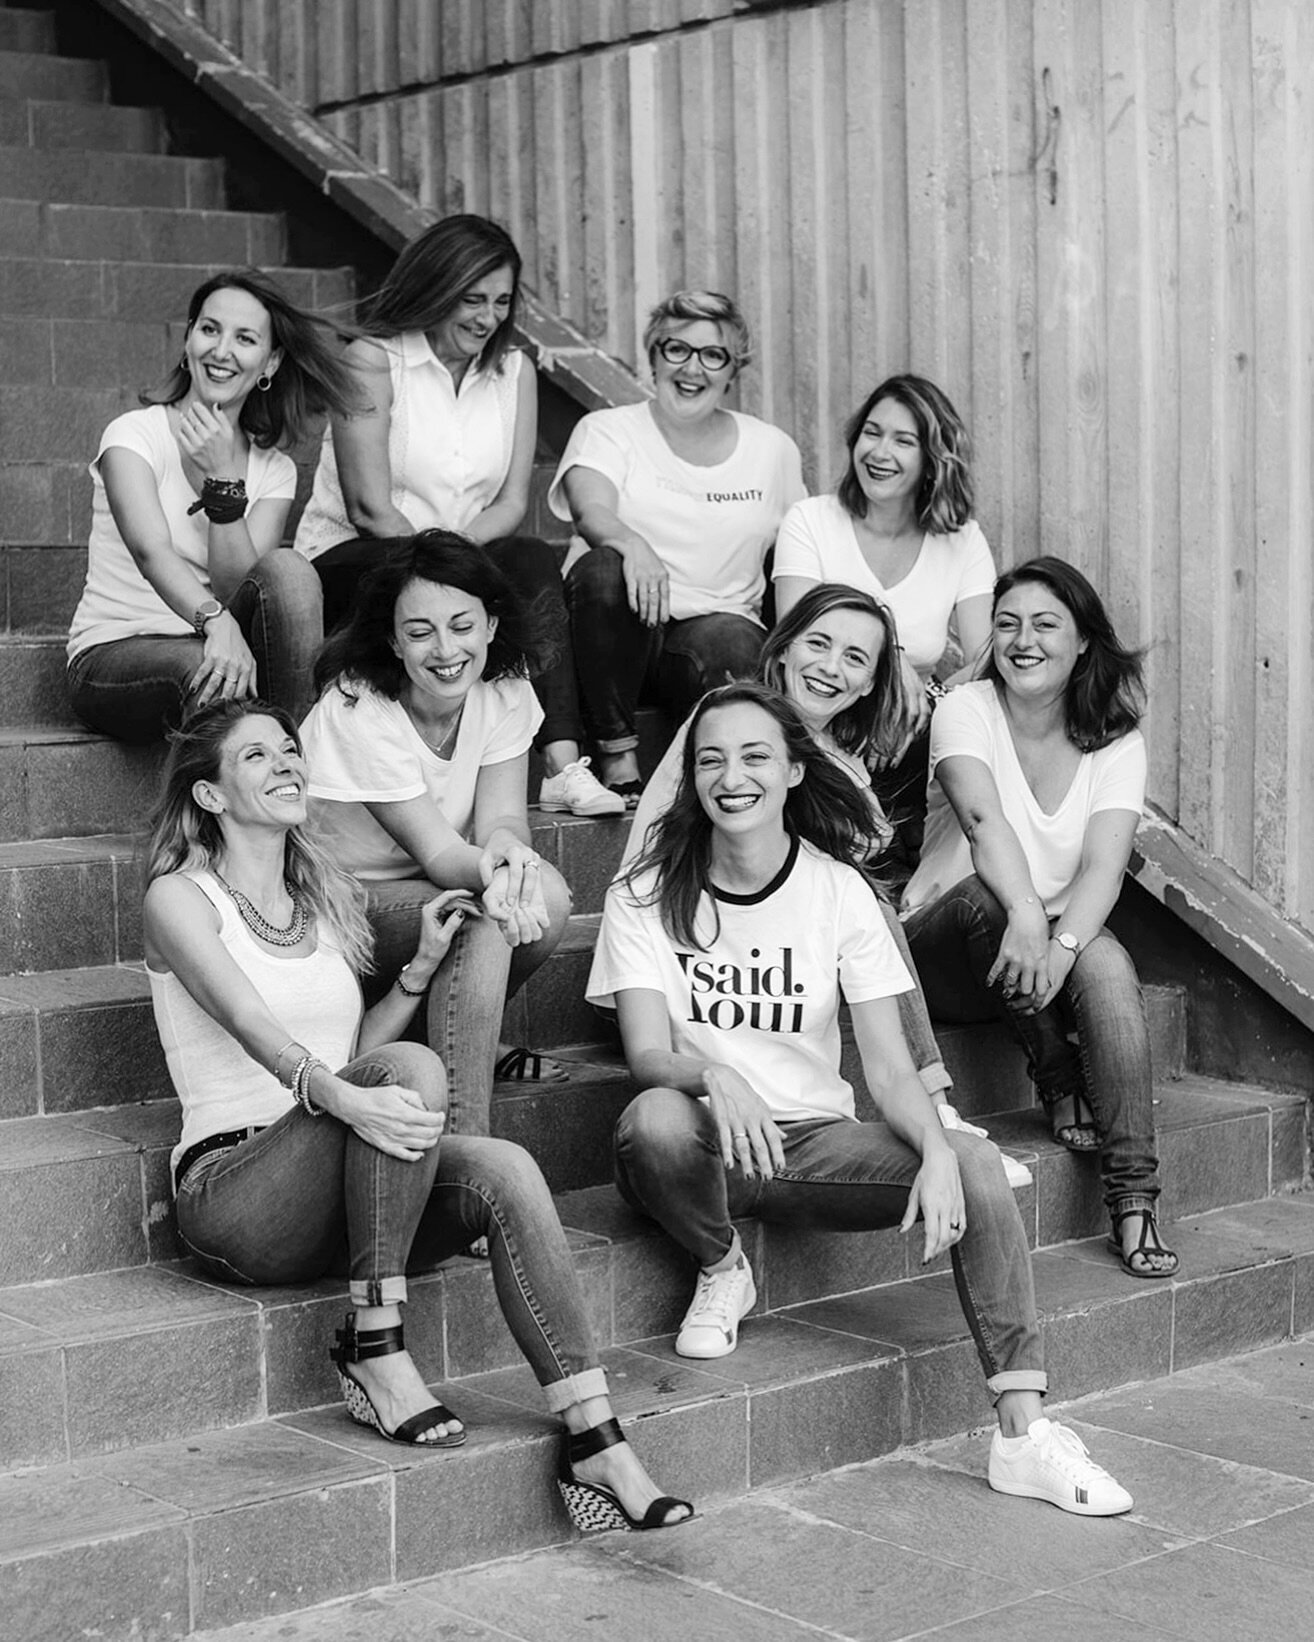 Live, love &amp; laugh a lot ! 
Friendship are forever 🤍
.
.
.
#evjf #photography #studiopushpa #clairepushpa #clairepushpaphotography #friends #friendship #evjfphotoshoot #bachelorette #bacheloretteparty #gettingmarried #weddingphotography #wedding